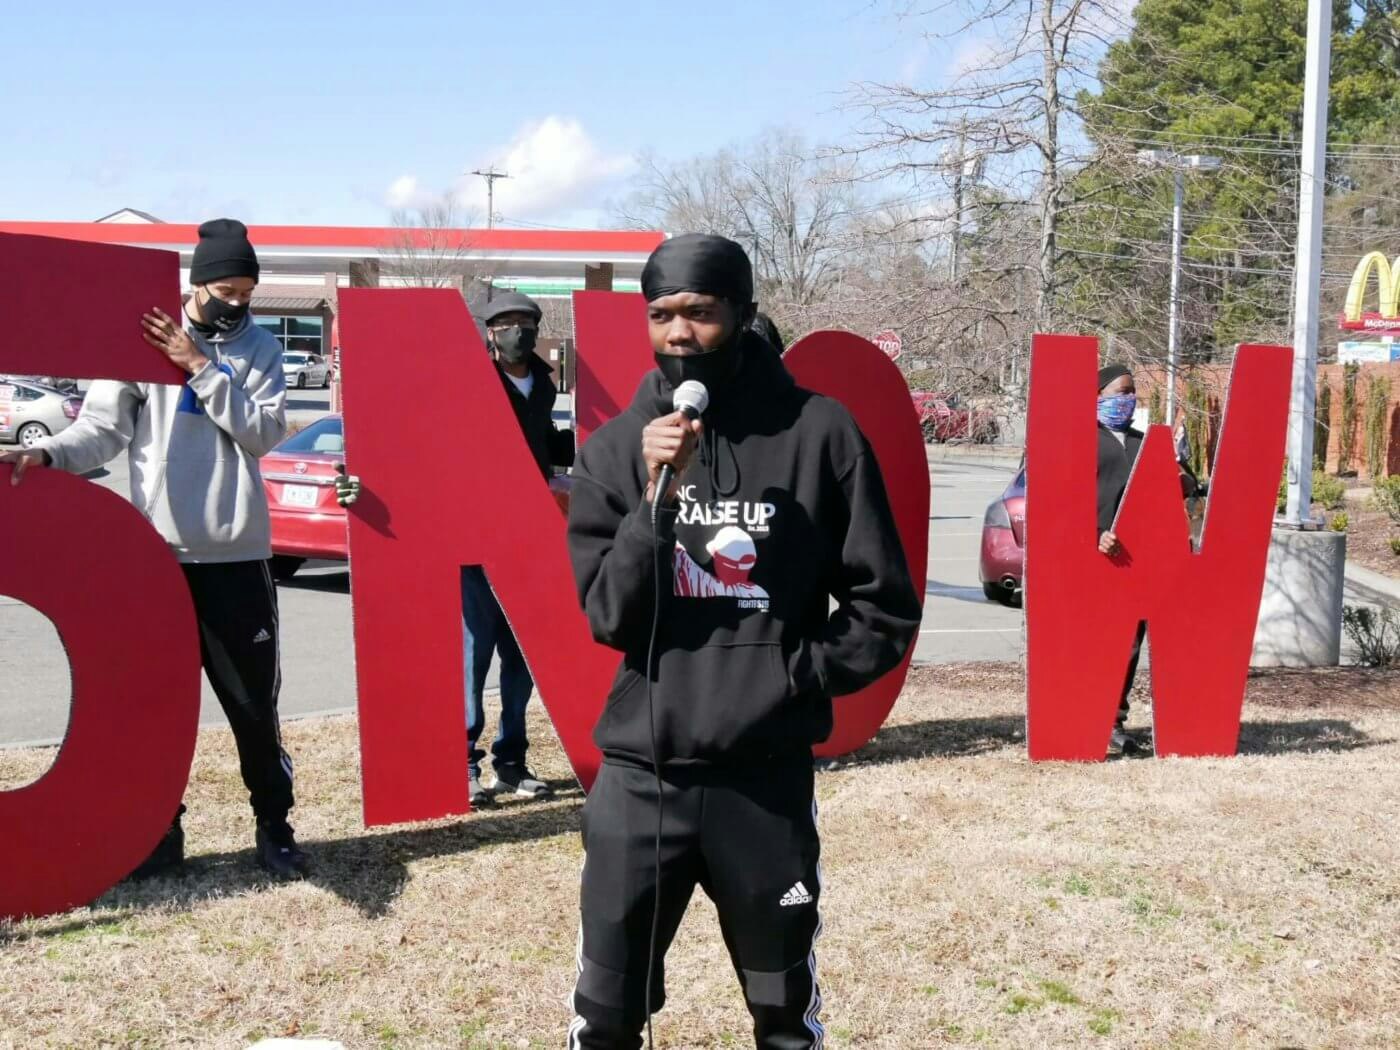 Nahshon Blount, a low-wage worker in North Carolina. Photo courtesy of Fight for $15